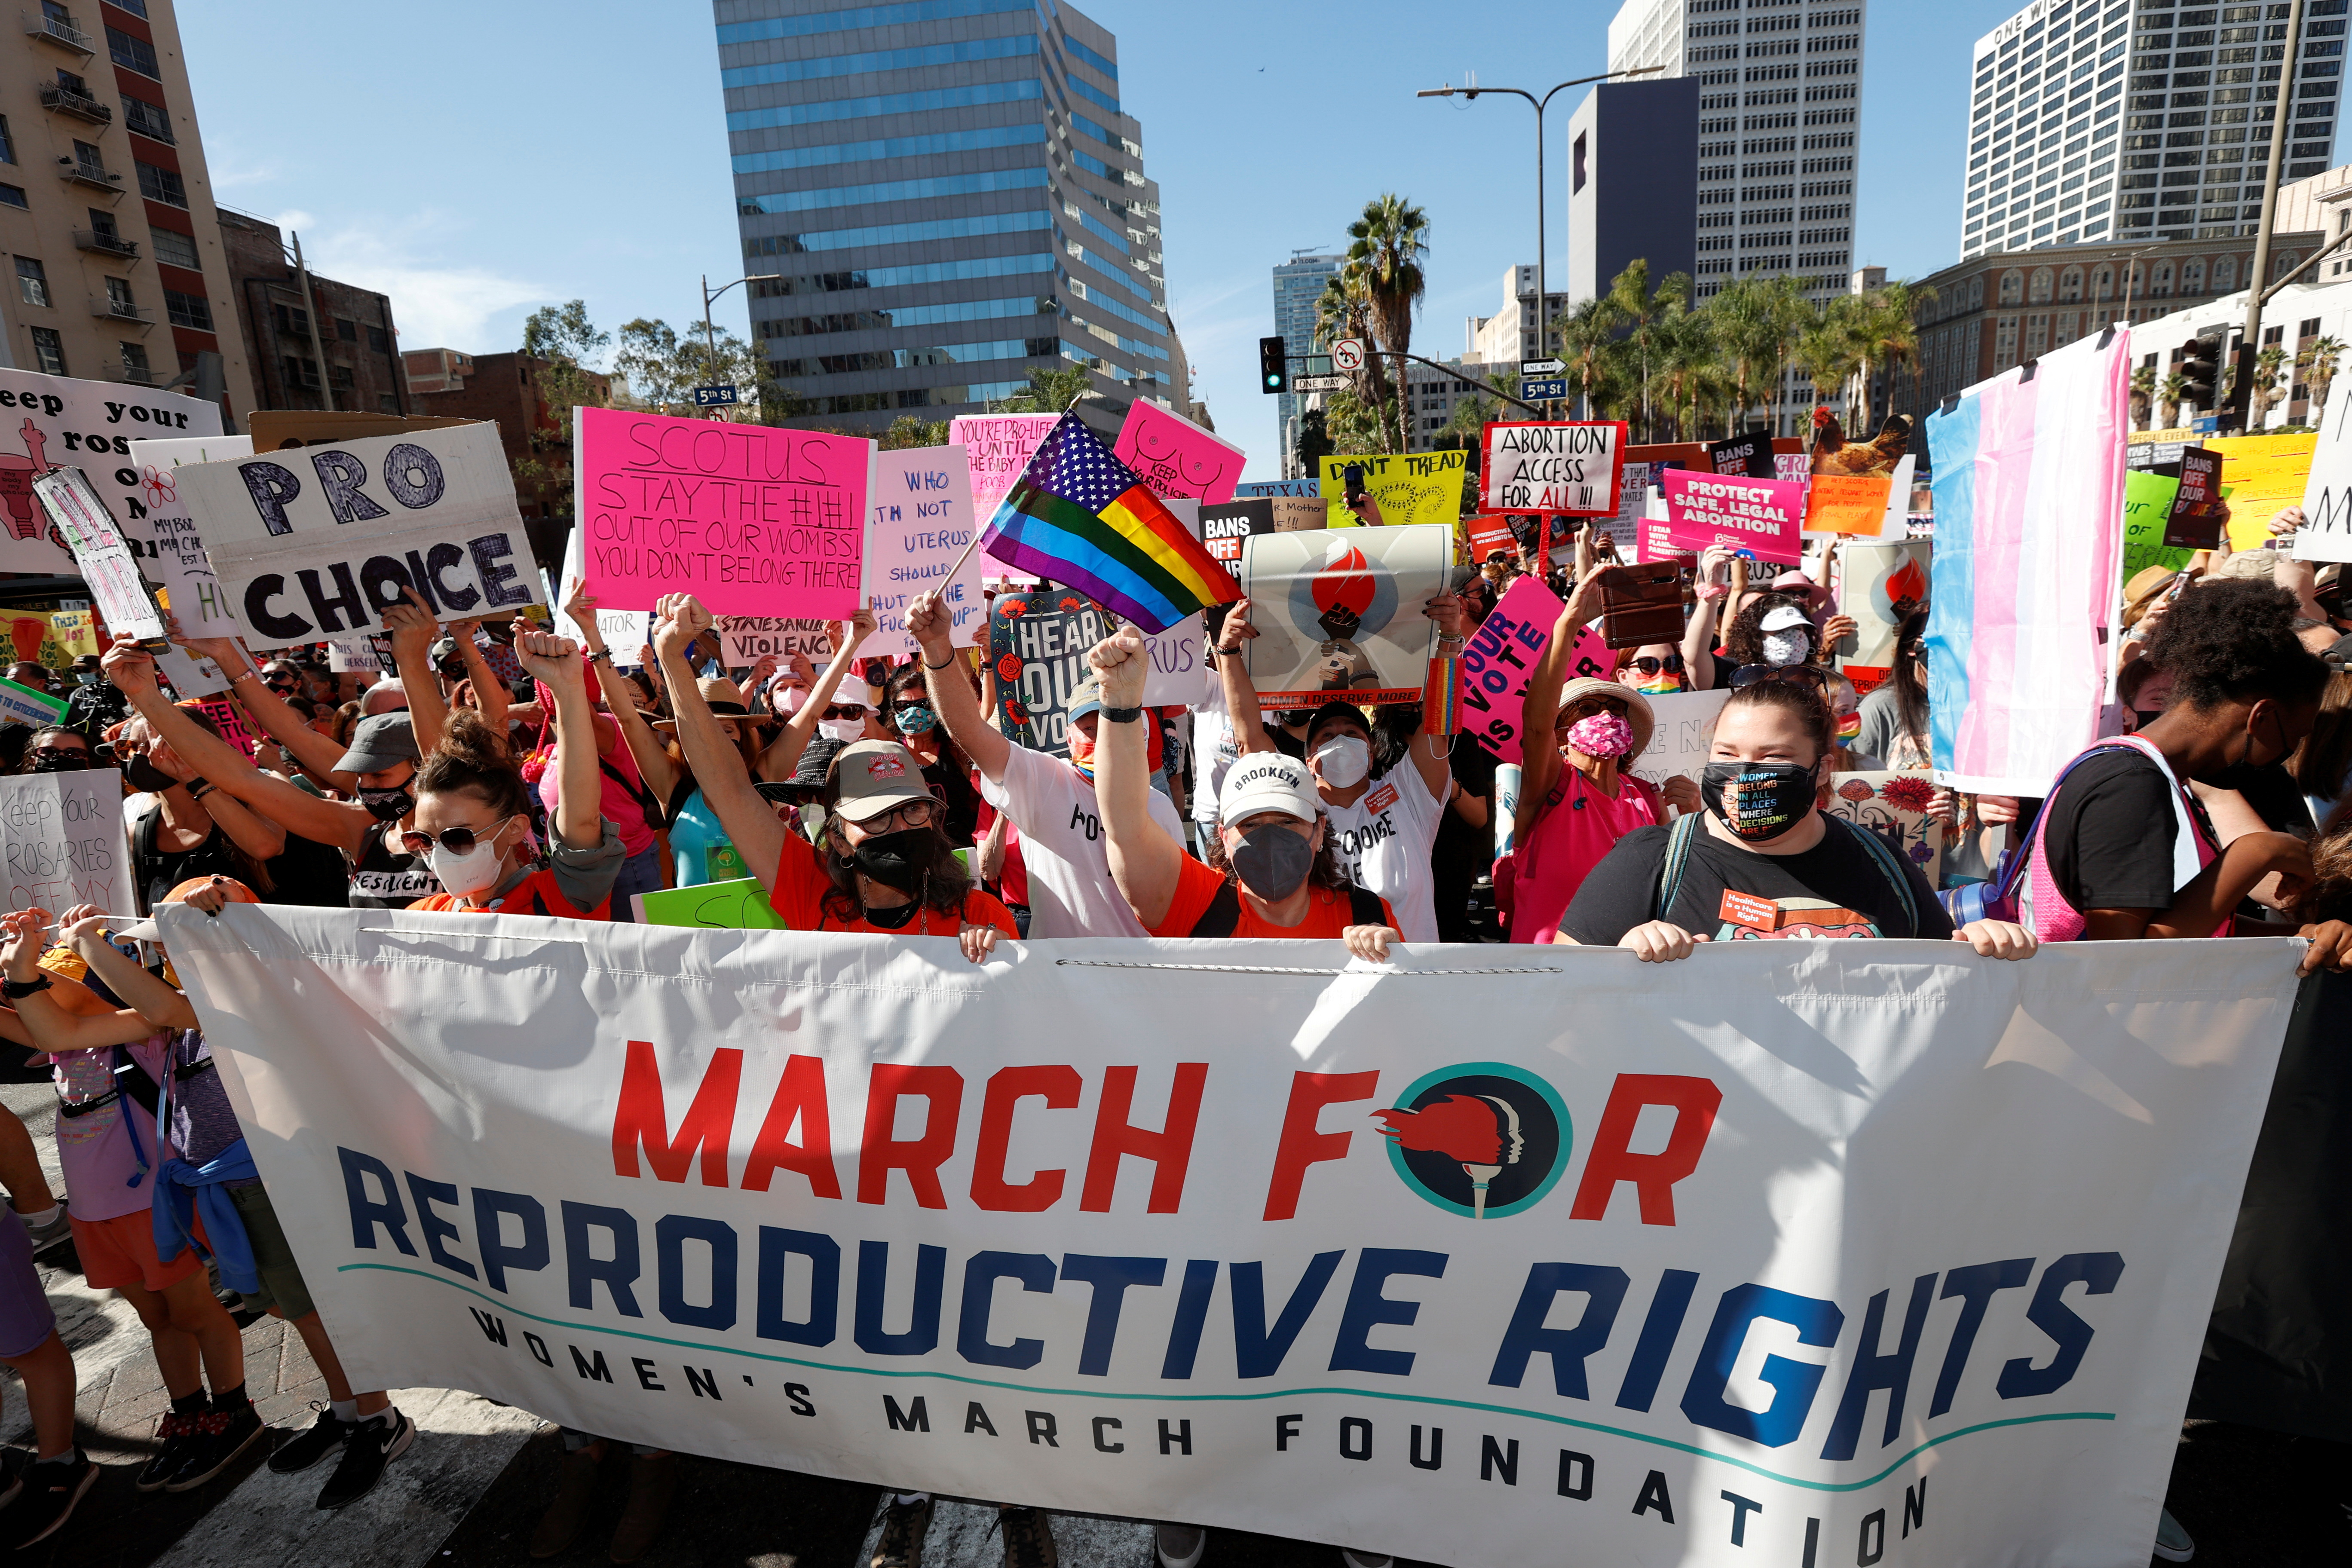 Supporters of reproductive choice take part in the nationwide Women's March in Los Angeles